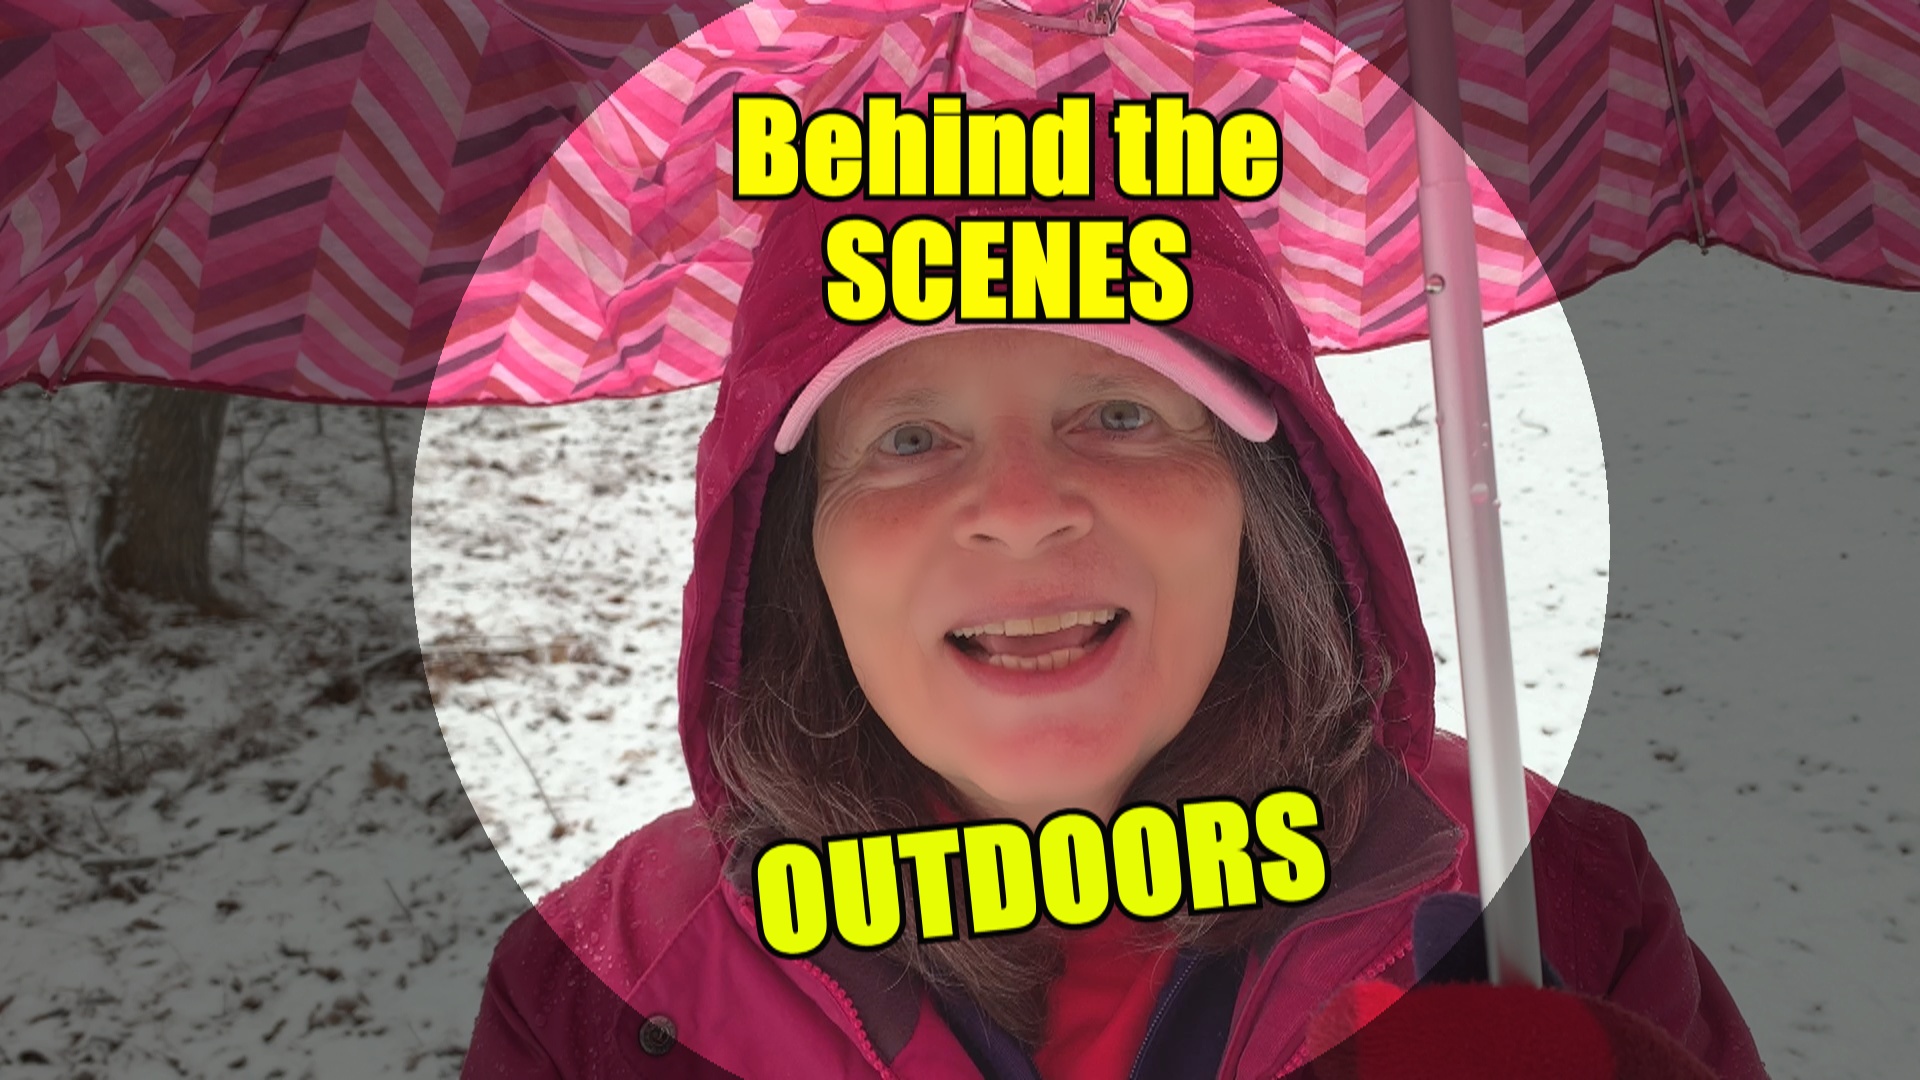 Behind the Scenes Making an Outdooro Video